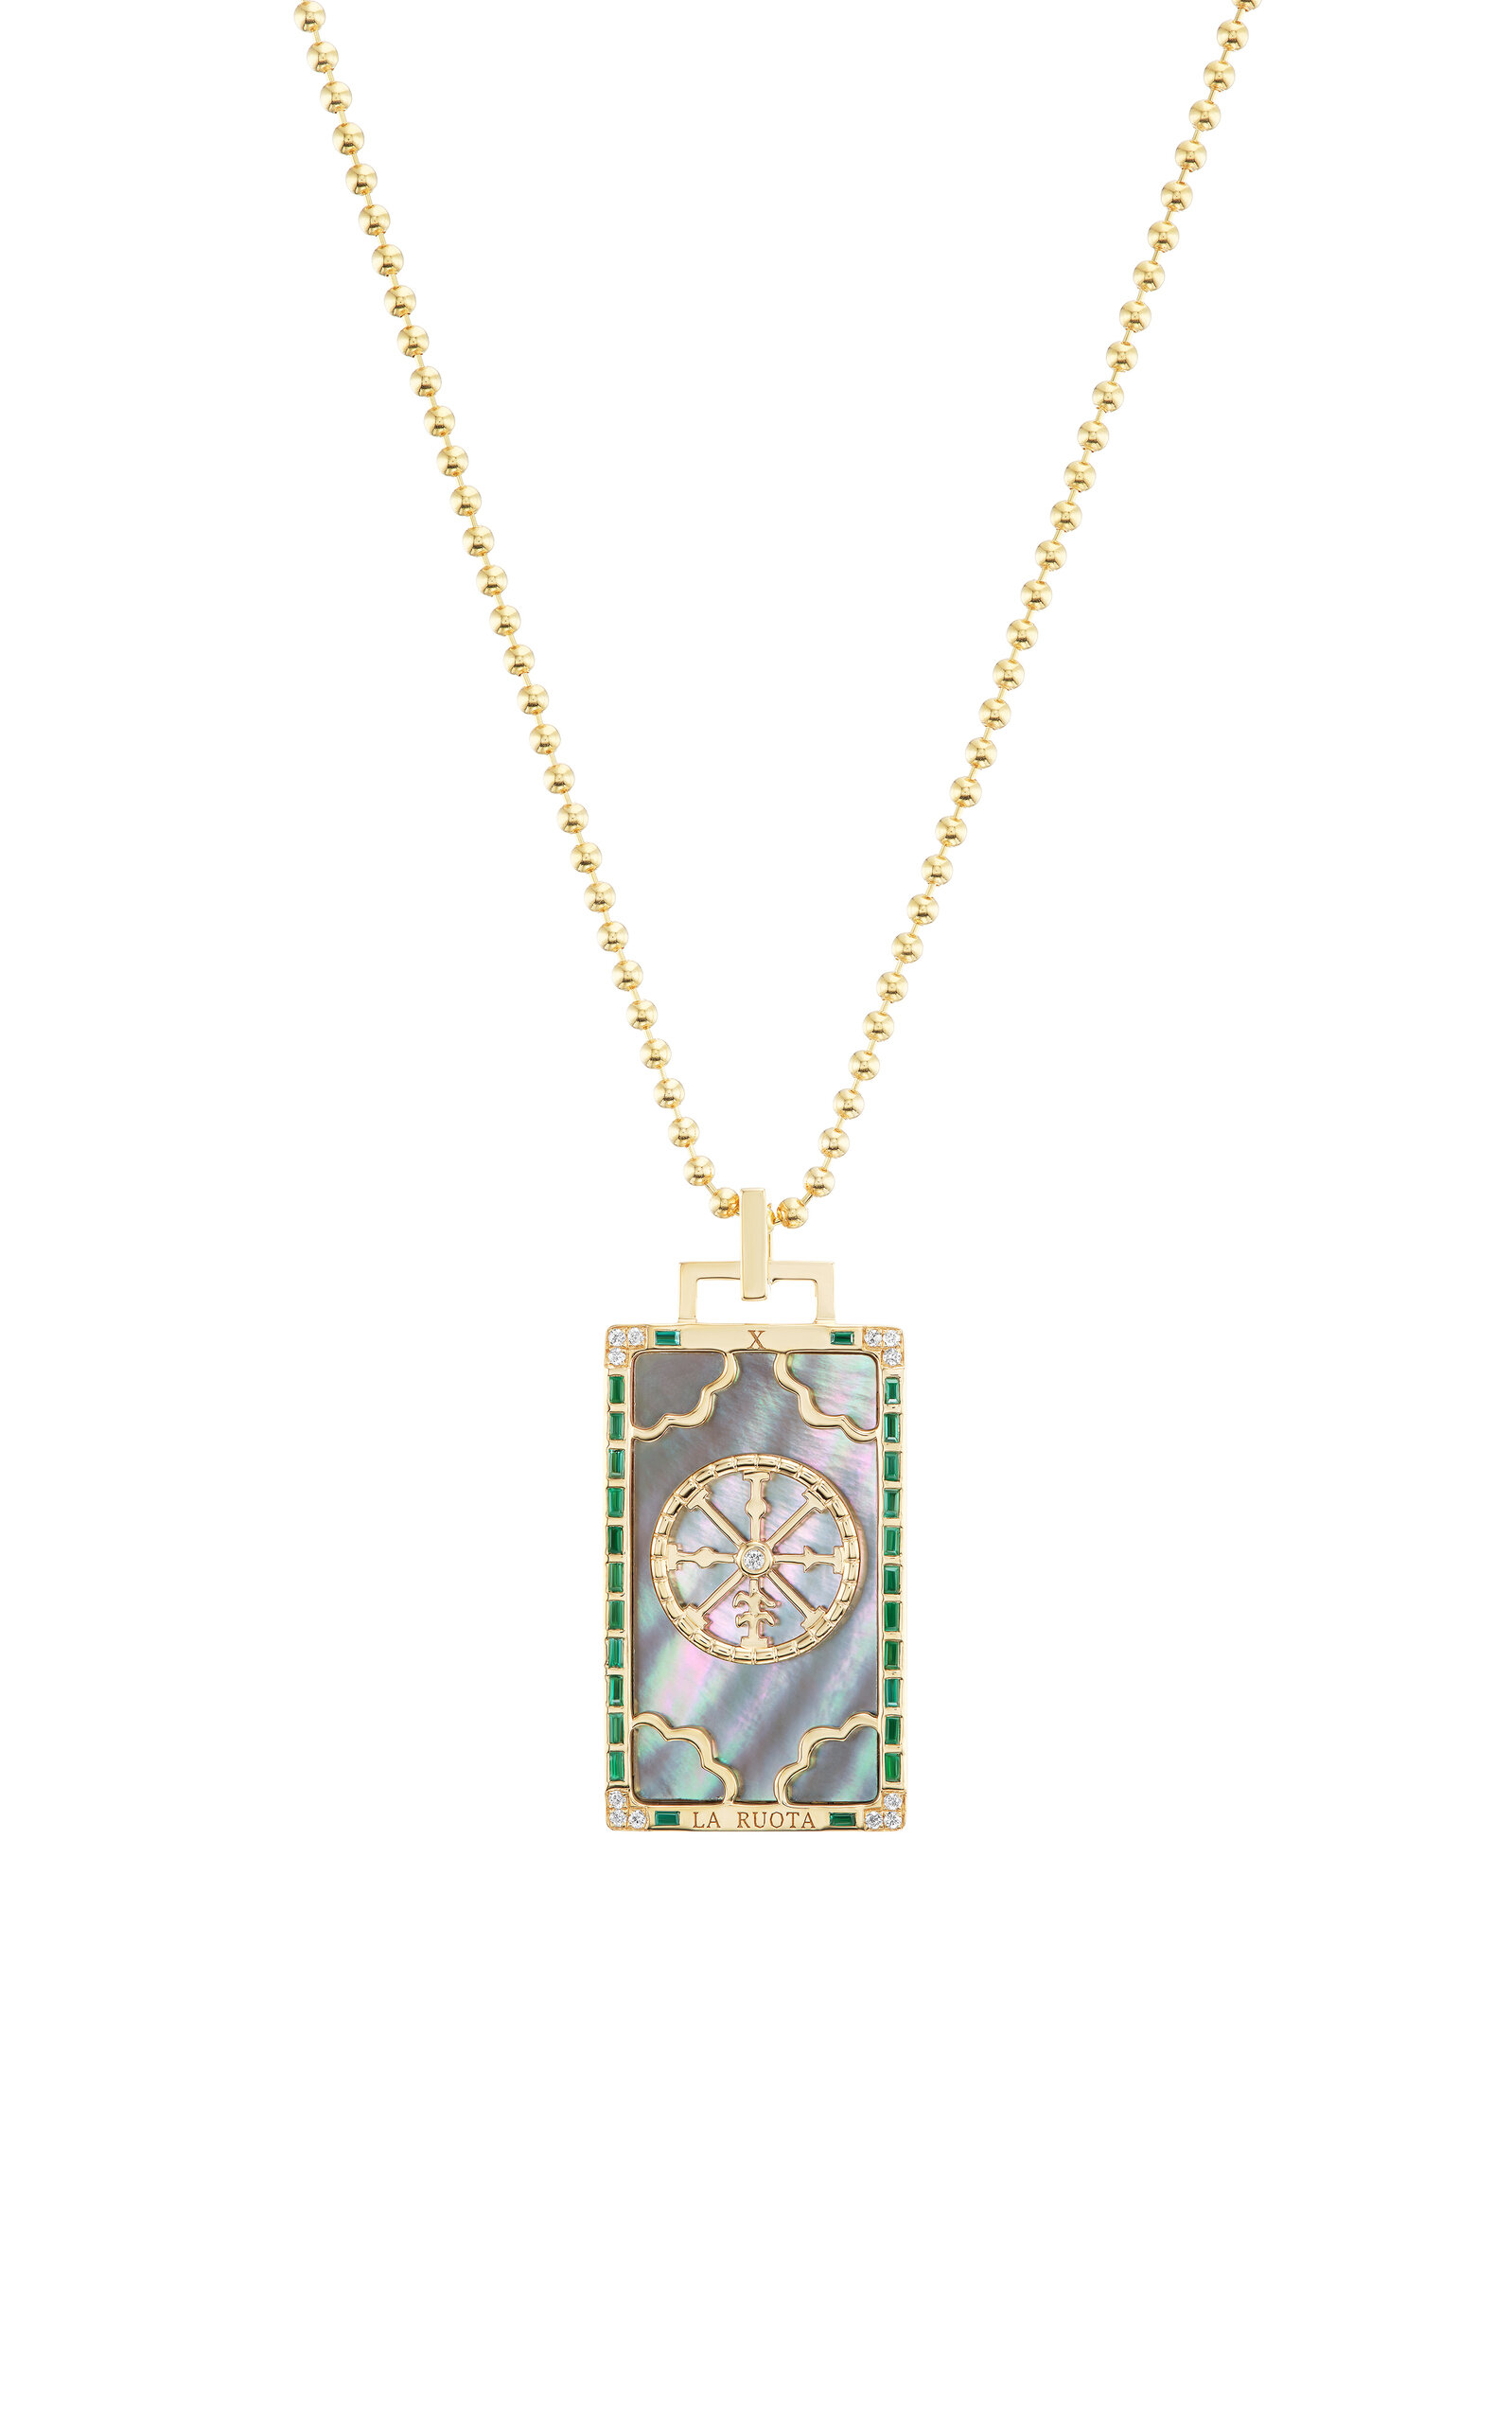 La Ruota Piccola 18K Yellow Gold Mother-of-Pearl Tarot Card Necklace